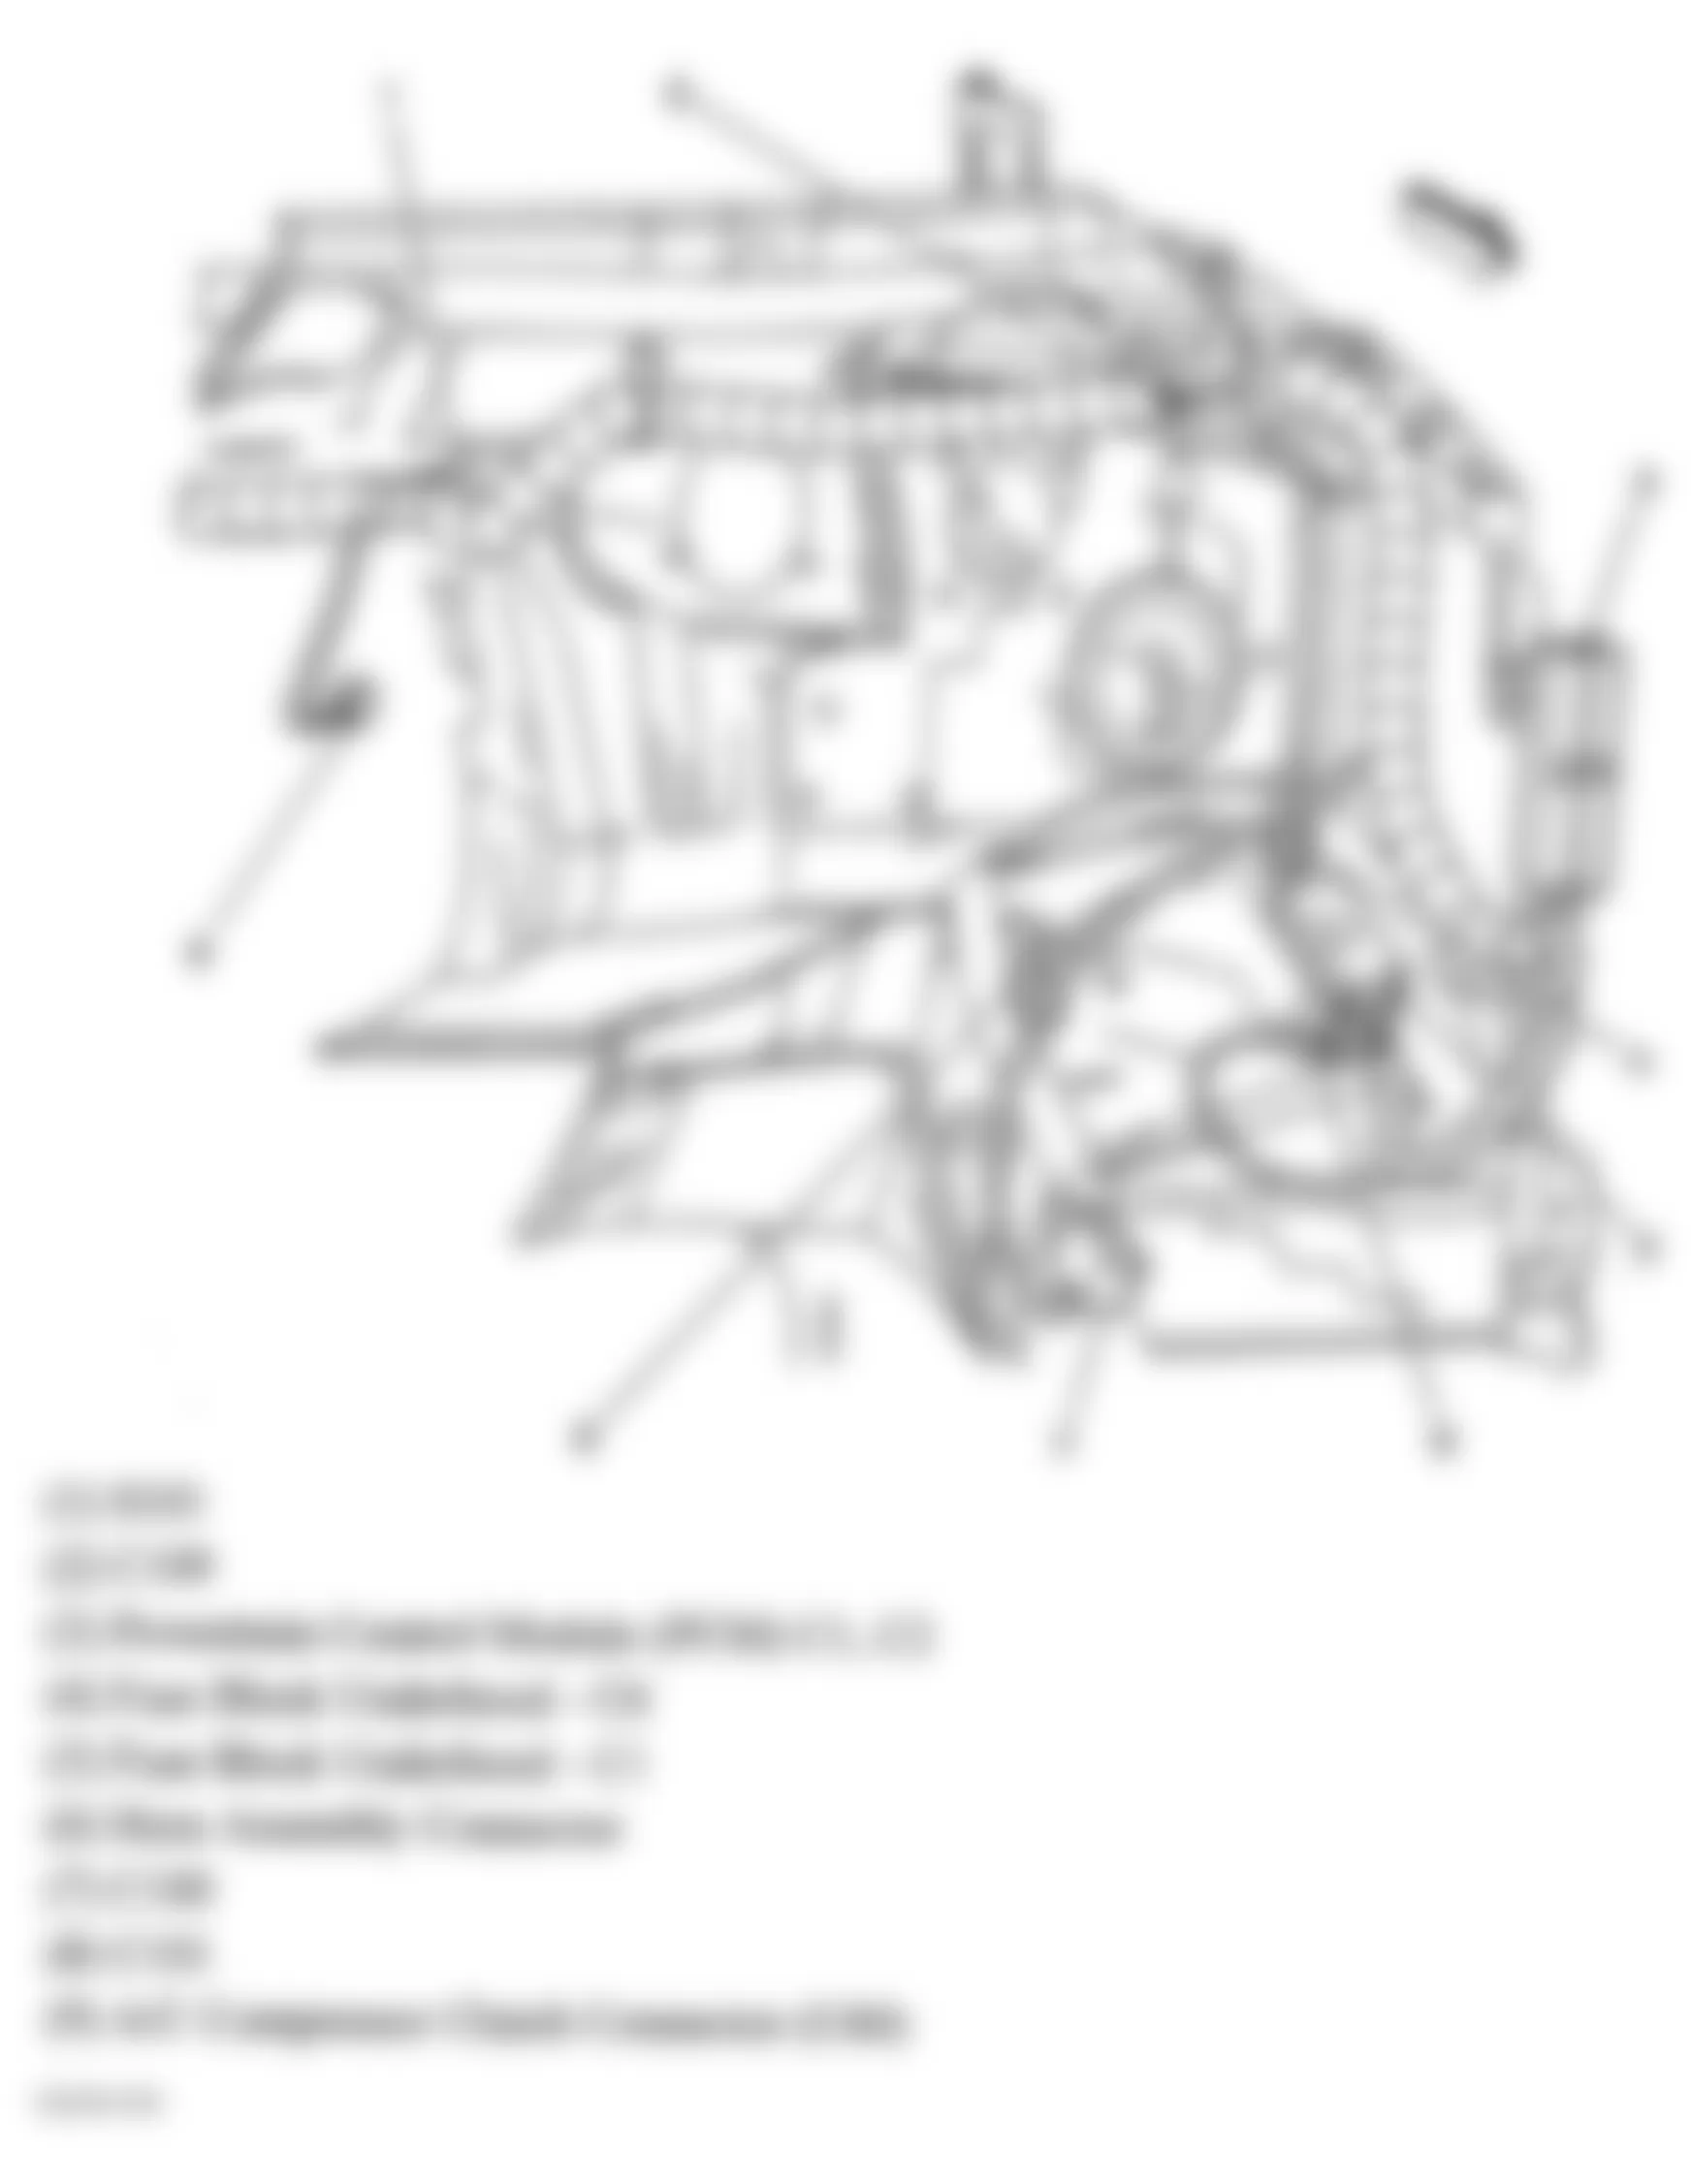 GMC Savana G2500 2007 - Component Locations -  Left Rear Of Engine Compartment